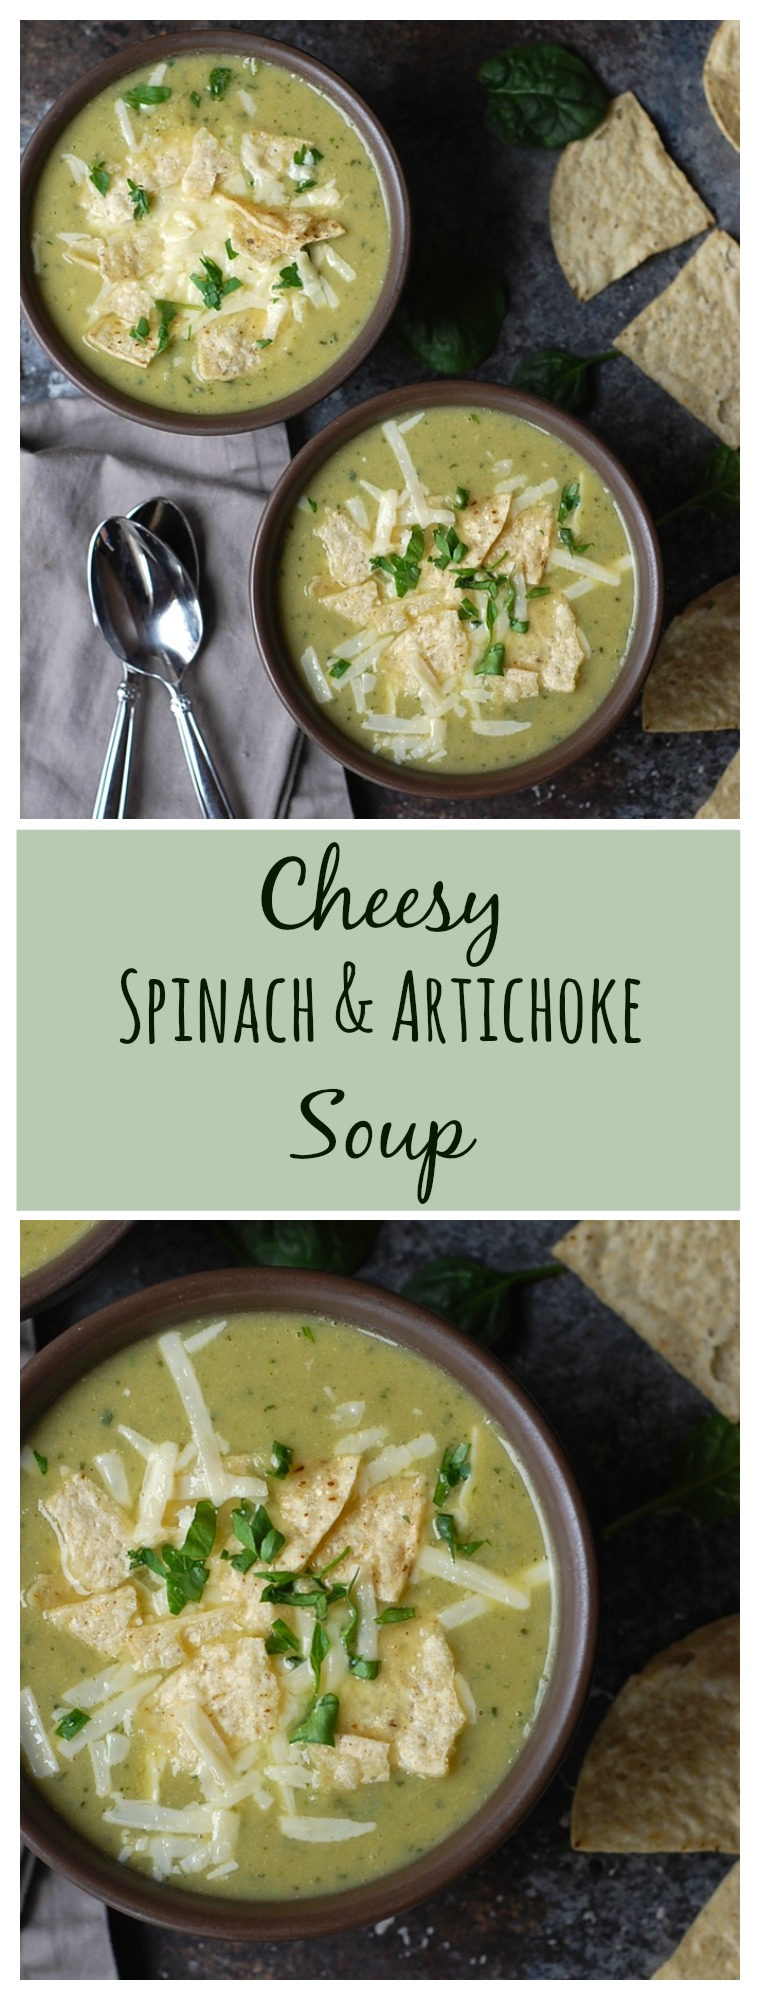 All the flavors of spinach and artichoke dip in soup form. Vegetarian, gluten-free, and only 250 calories a bowl.